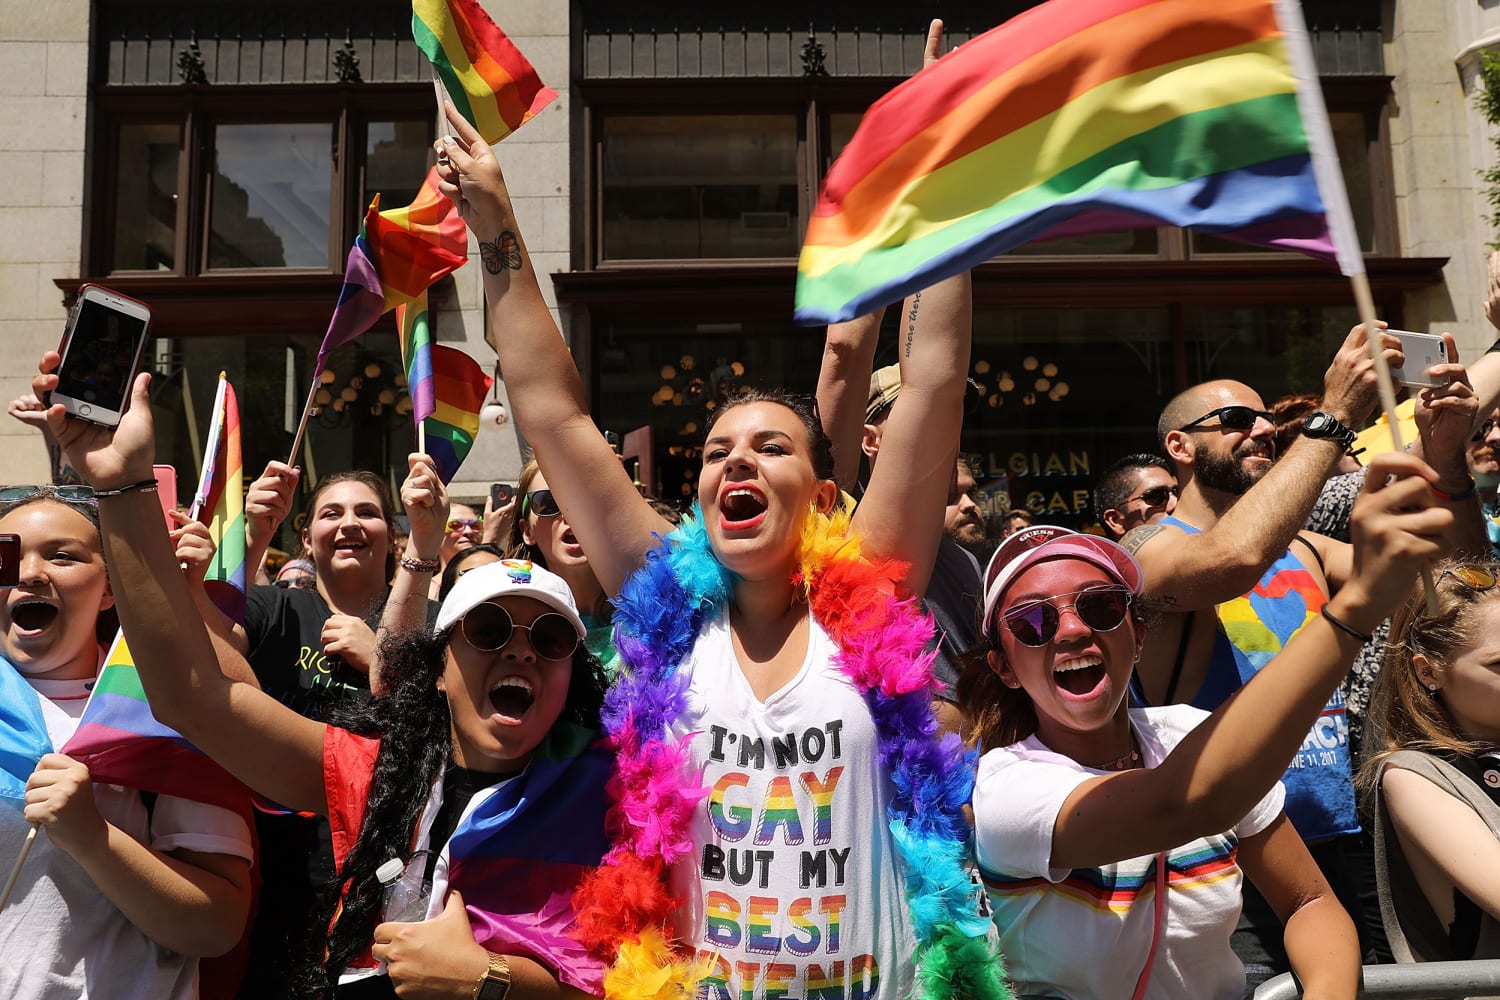 NFL players and staff showed out to support the NYC #Pride parade